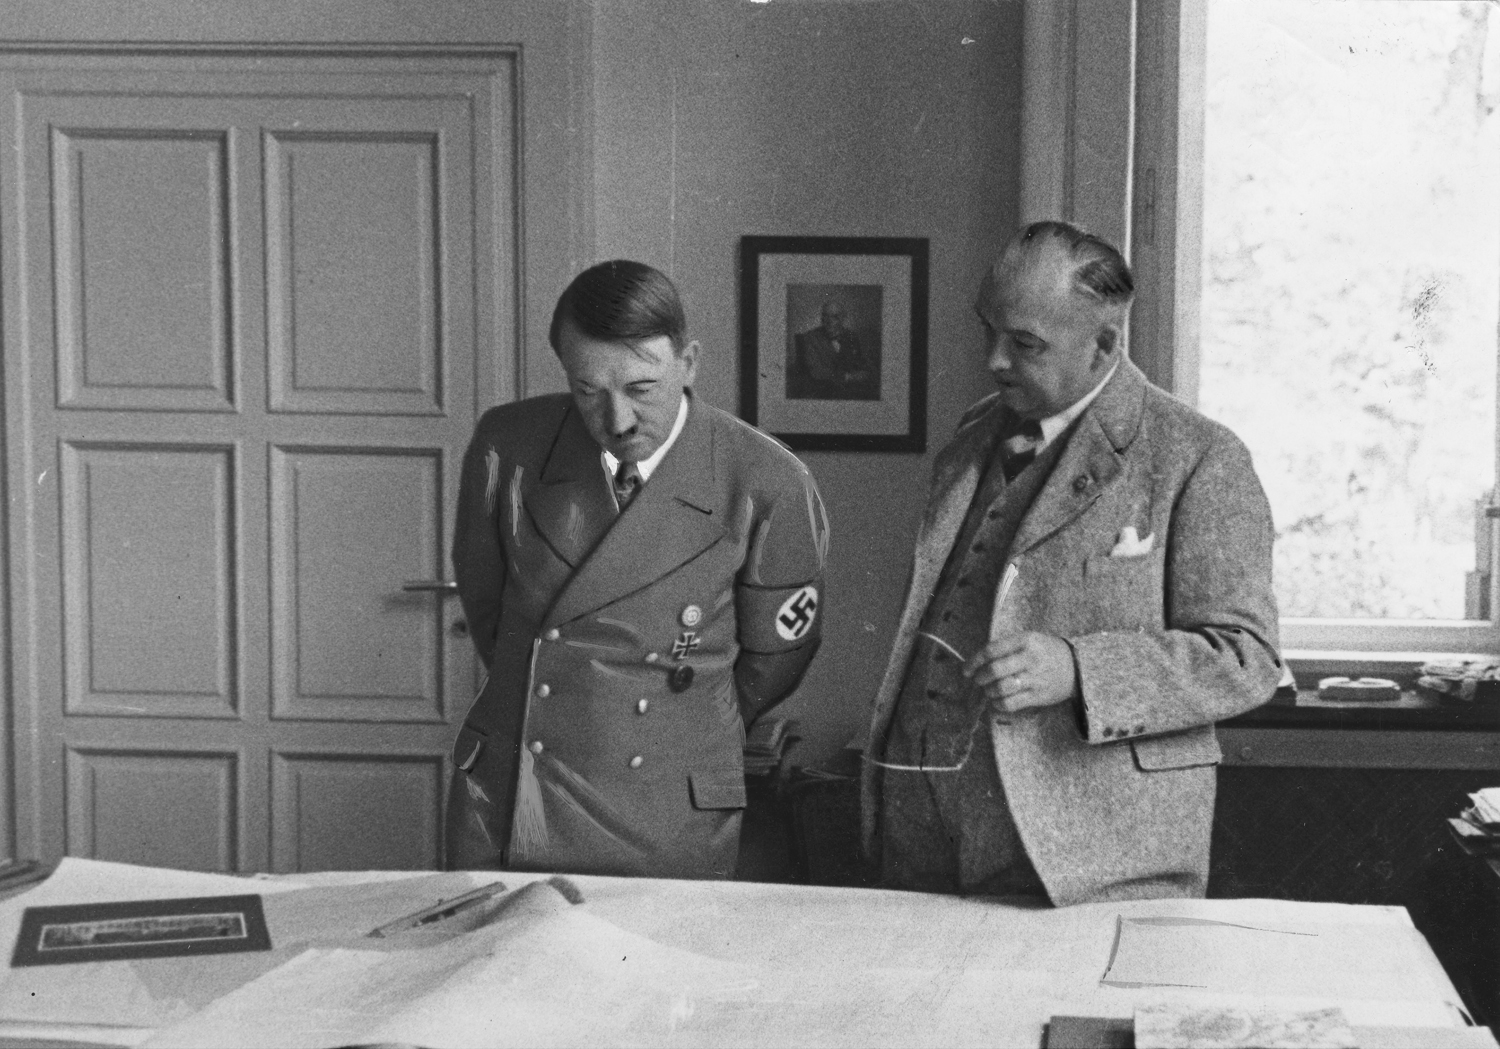 Adolf Hitler during a visit to the atelier of architect Woldemar Brinkmann, he is shown the plans for Munich's opera and Berlin's Reichstag